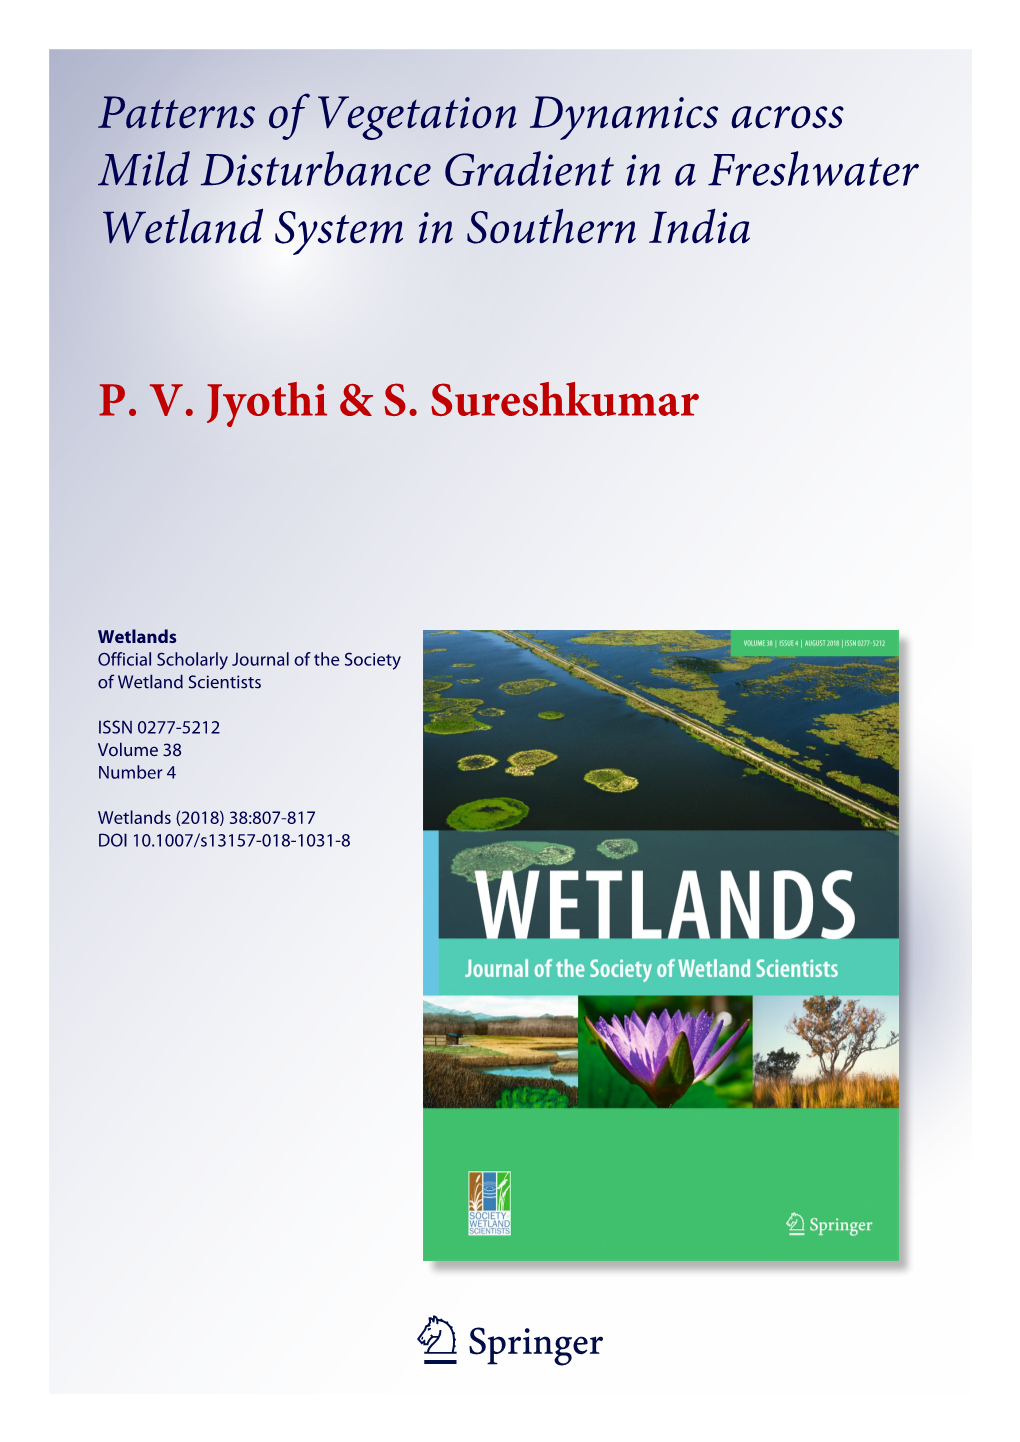 Patterns of Vegetation Dynamics Across Mild Disturbance Gradient in a Freshwater Wetland System in Southern India